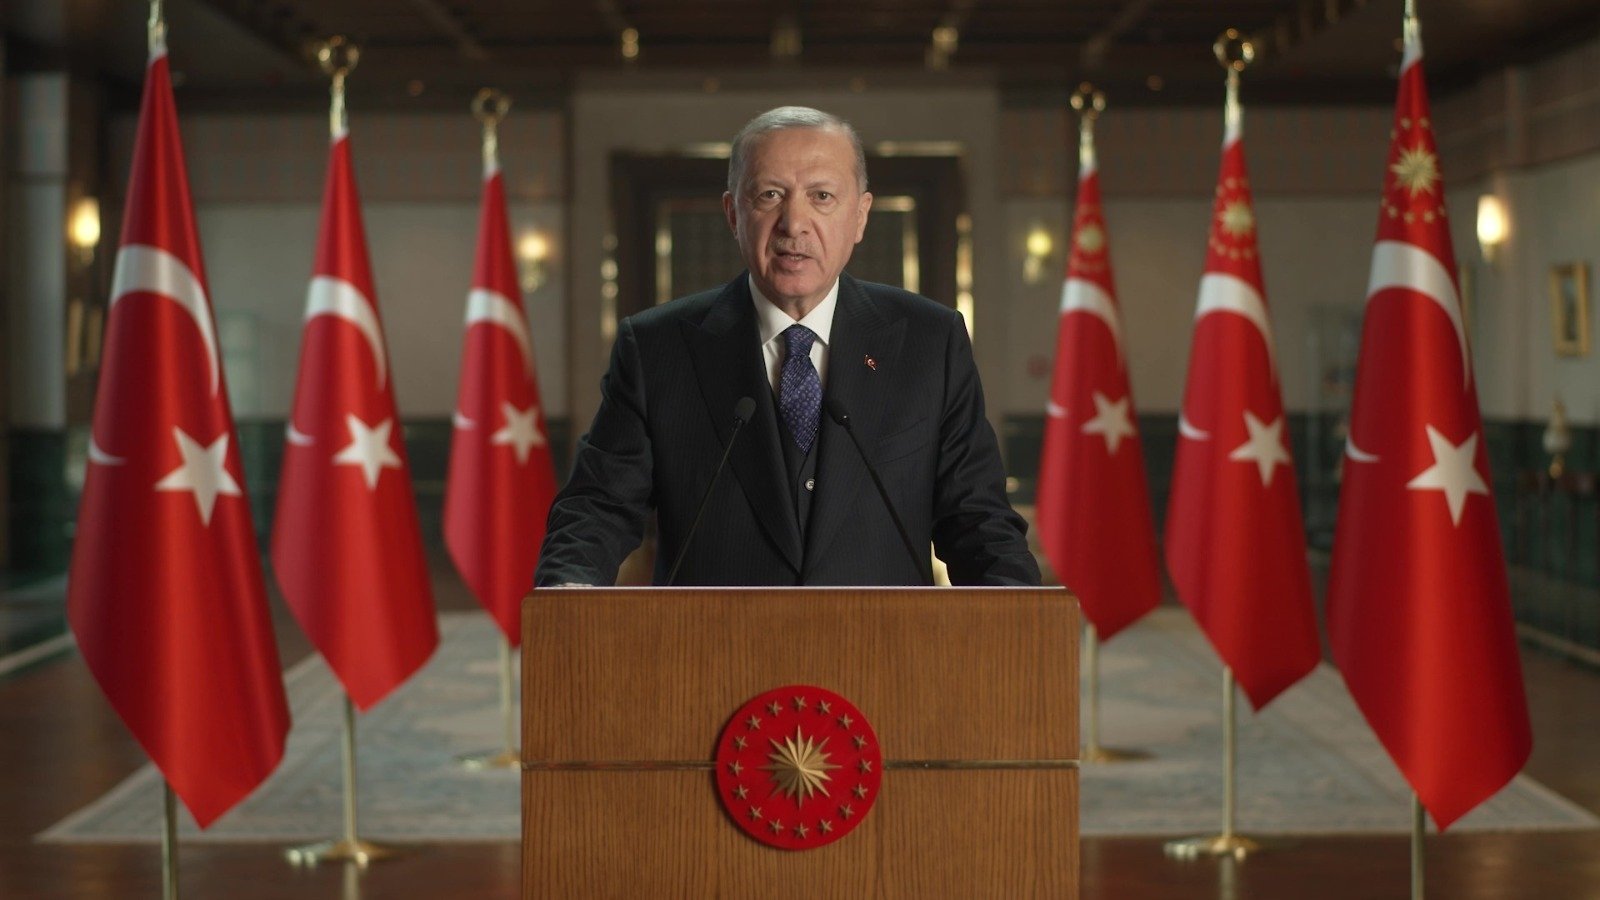 President Recep Tayyip Erdoğan sends a video message at the 89th Interpol General Assembly meeting held in Istanbul, Turkey, Nov. 23, 2021. (DHA Photo)